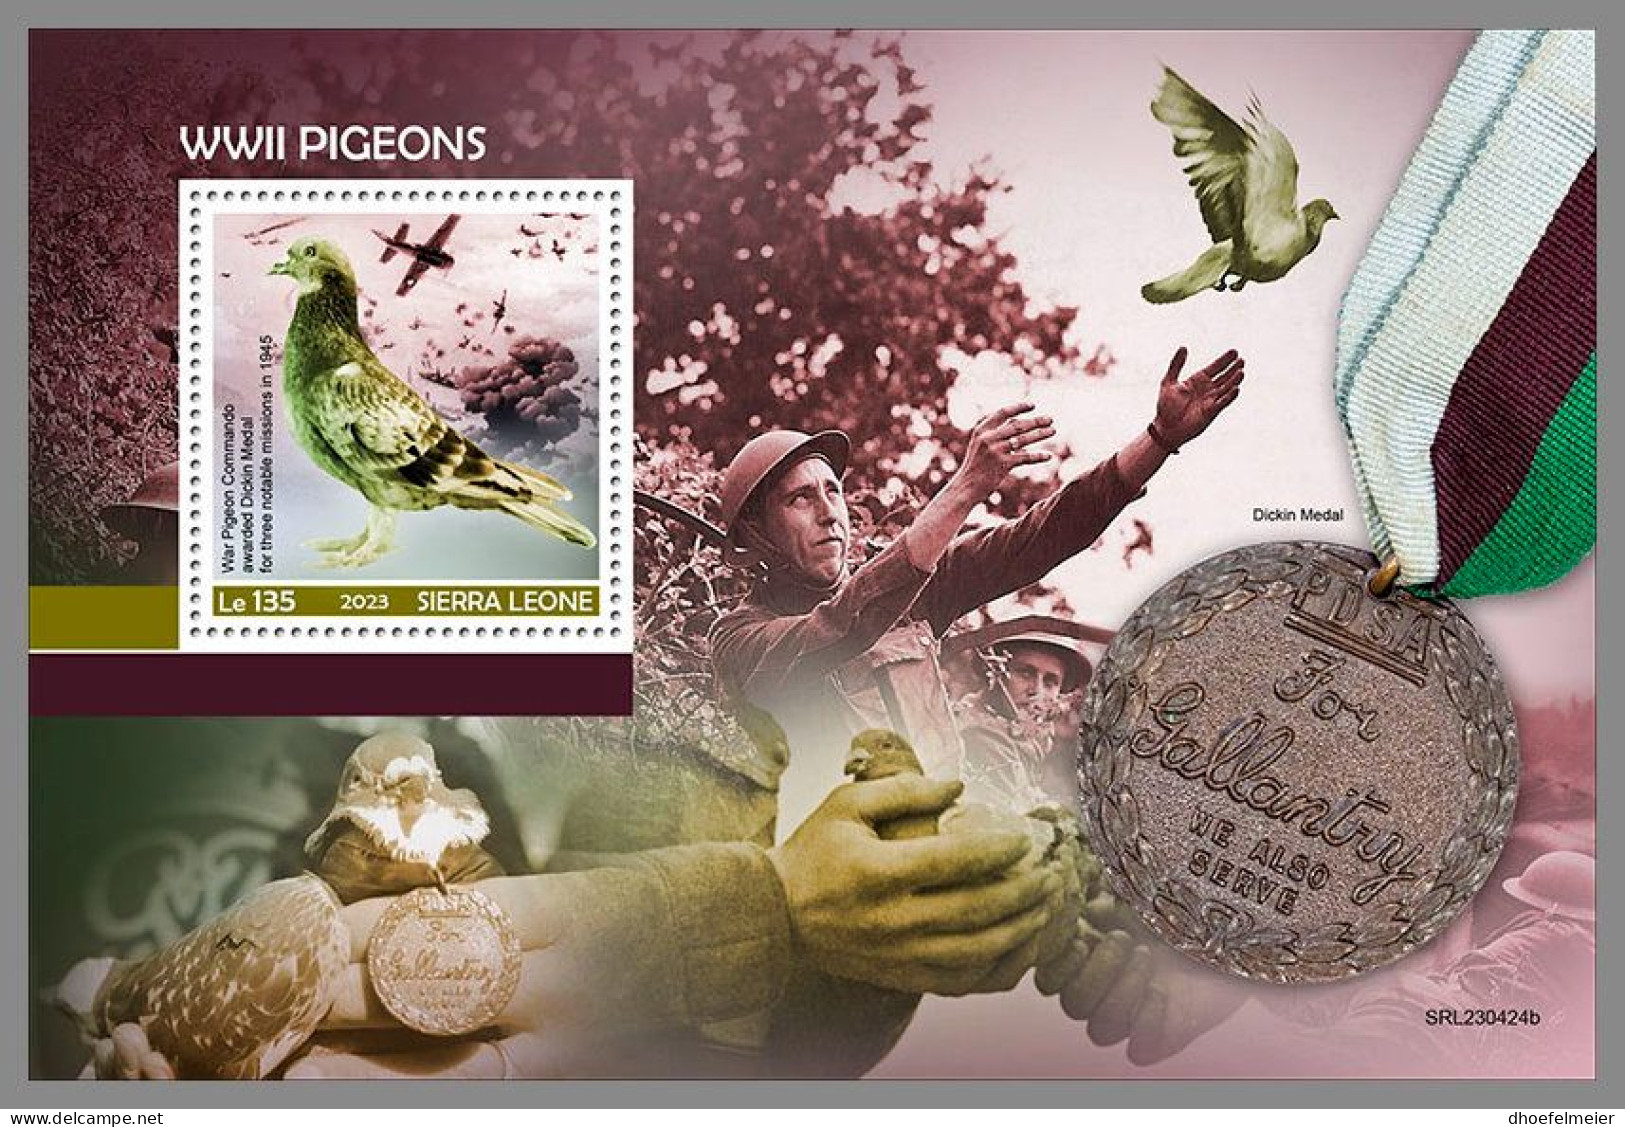 SIERRA LEONE 2023 MNH WWII Pigeons Tauben S/S – OFFICIAL ISSUE – DHQ2407 - Pigeons & Columbiformes